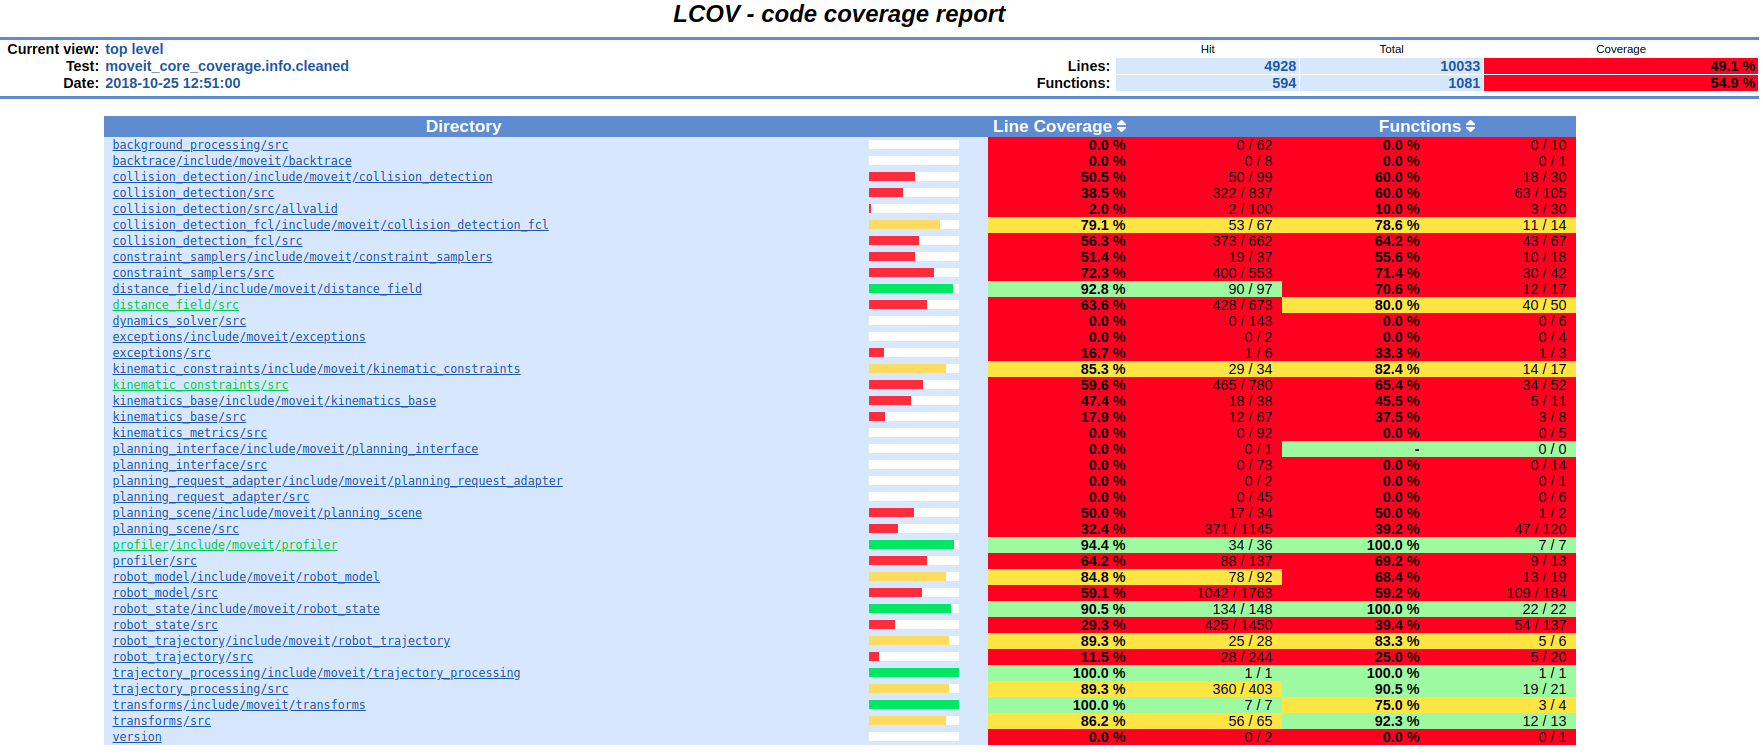 example code coverage output